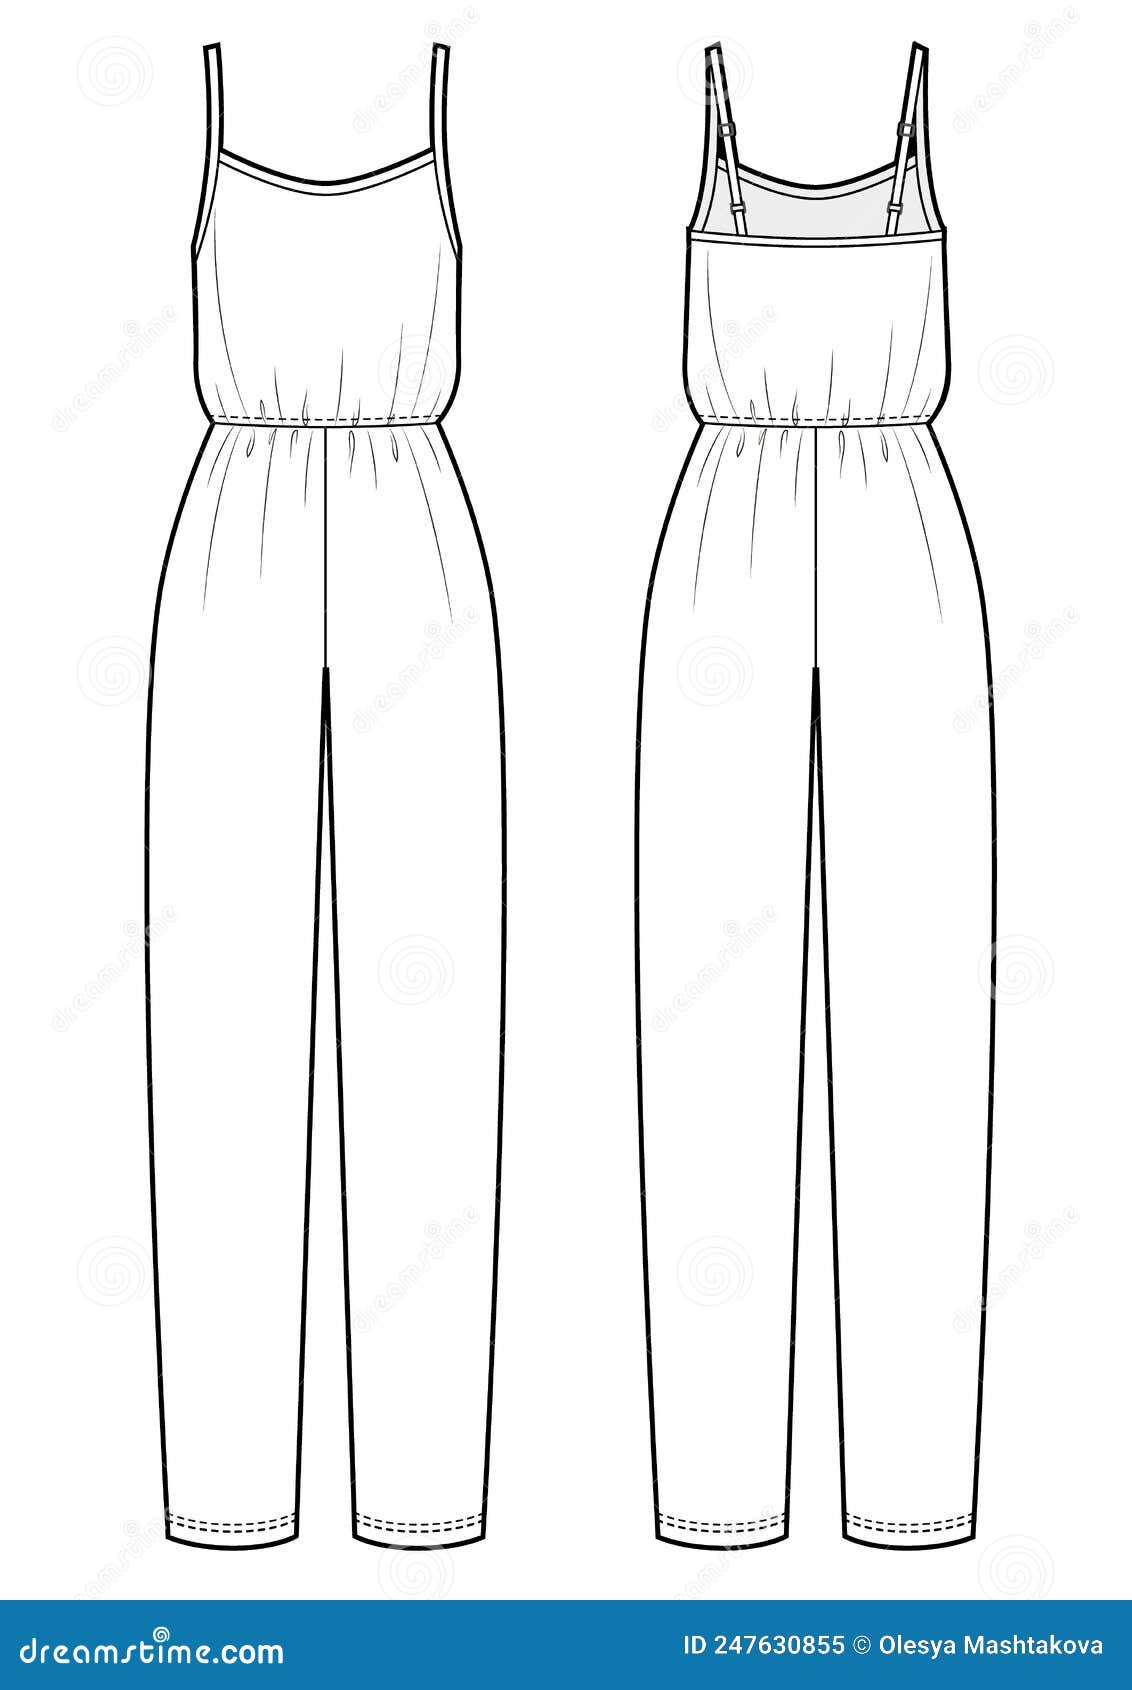 Technical Sketche of Women S Jumpsuit with Straps. Stock Vector ...